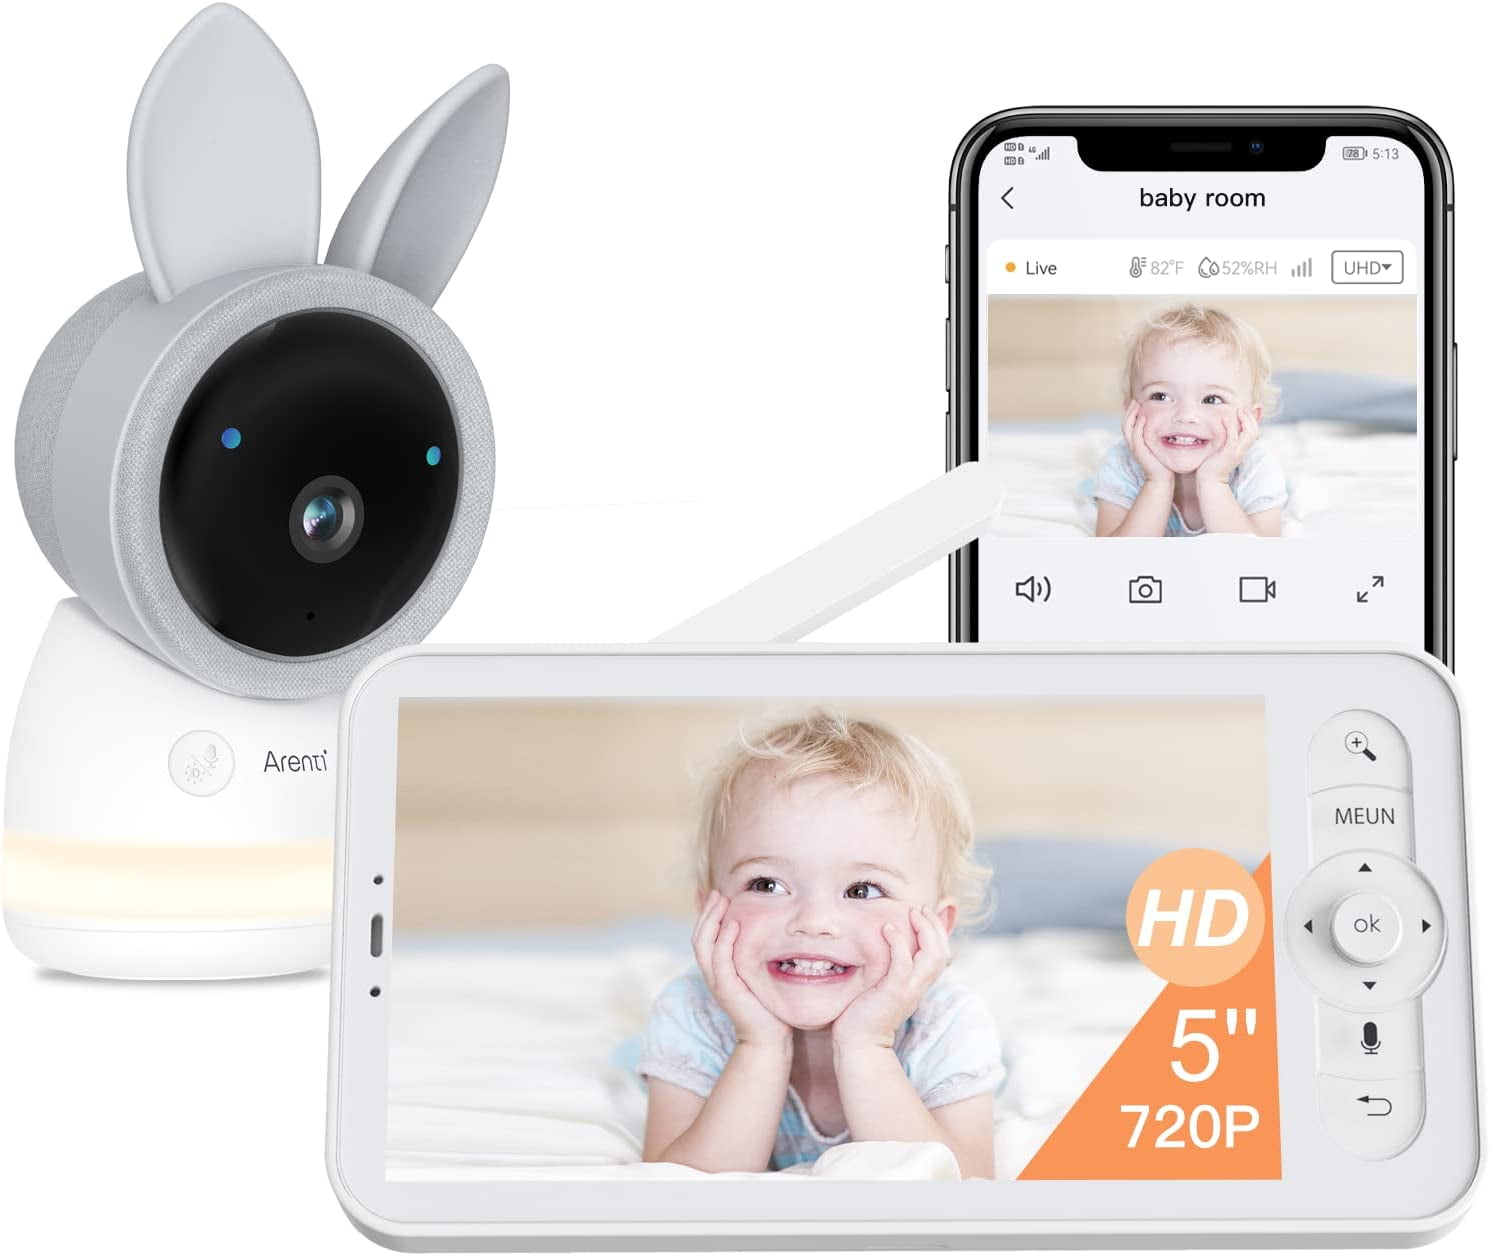 ieGeek 2K Baby Monitor, 5 inch WiFi Video Baby Camera, 2 Way Audio, Motion  & Cry Detection, Temperature & Humidity Sensor, Night Vision, Free Smart